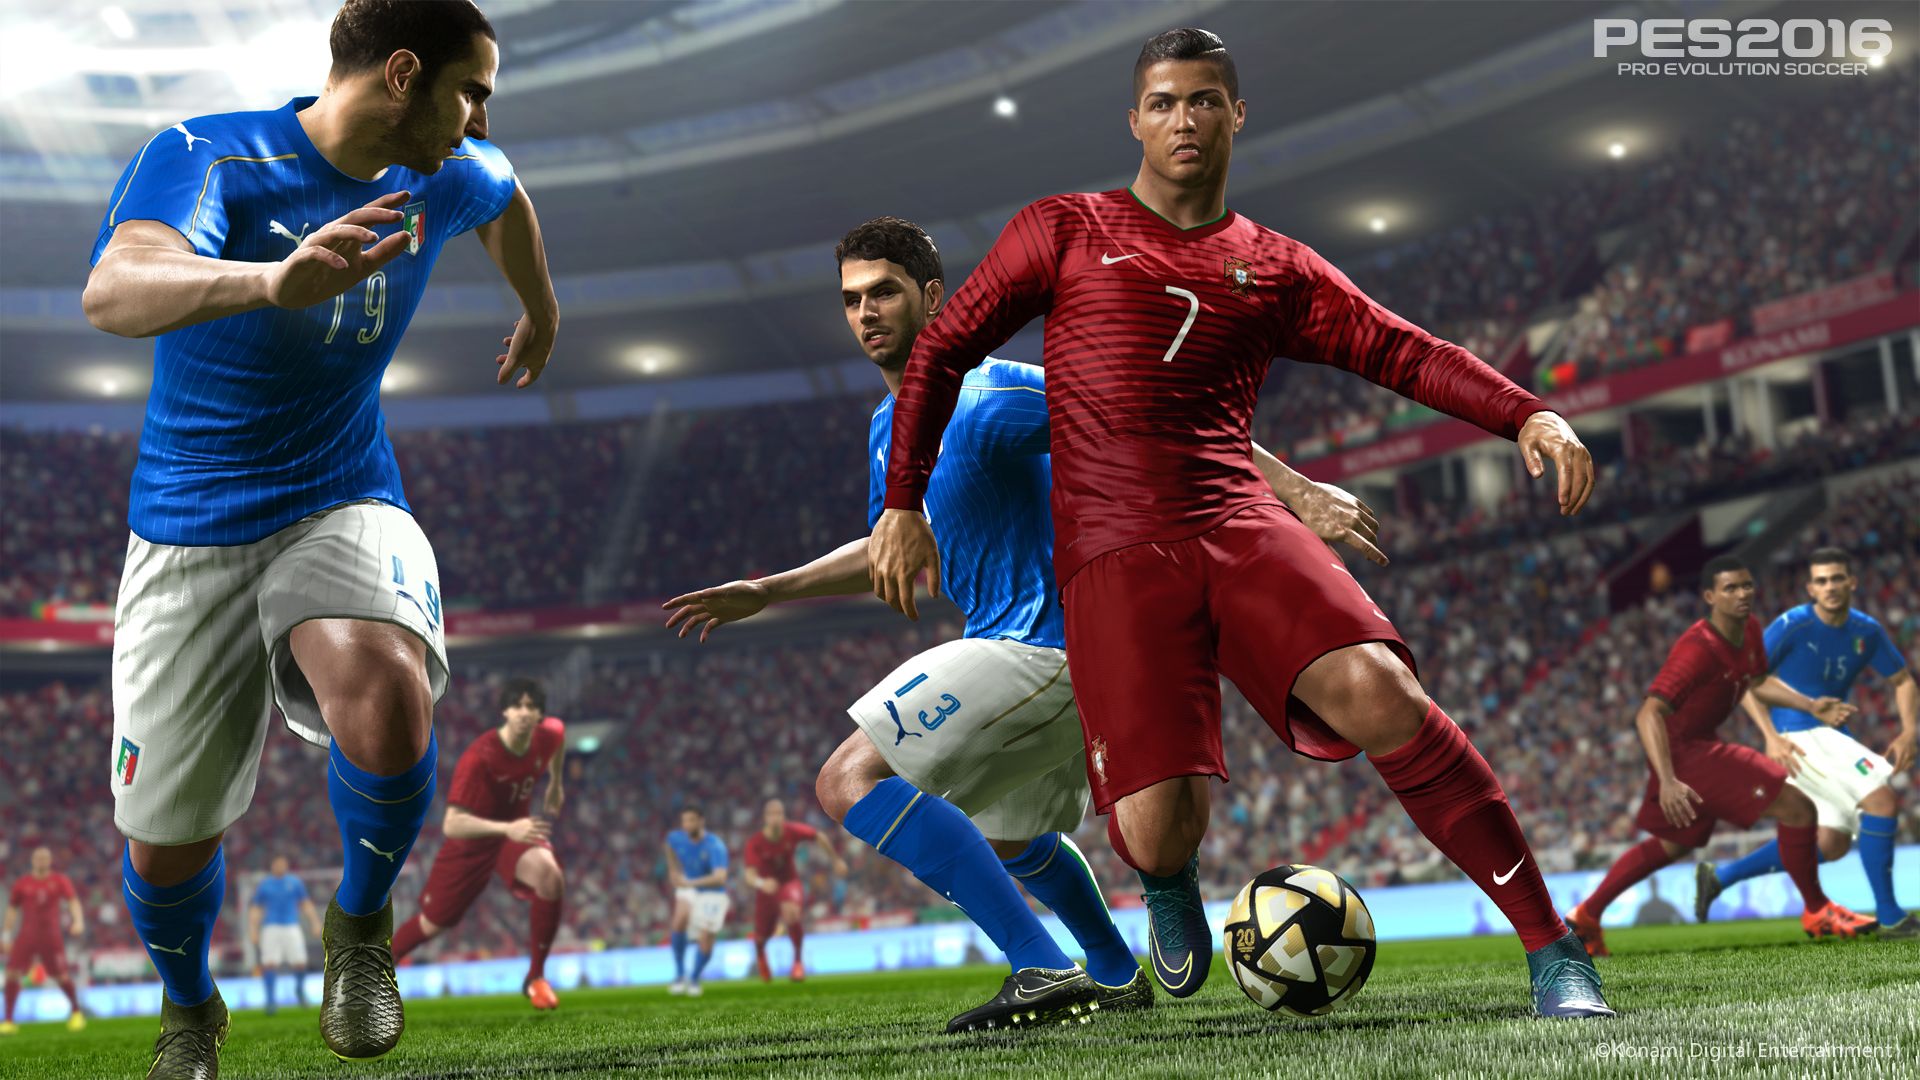 The brilliant PES 2016 is free on PC, download it now